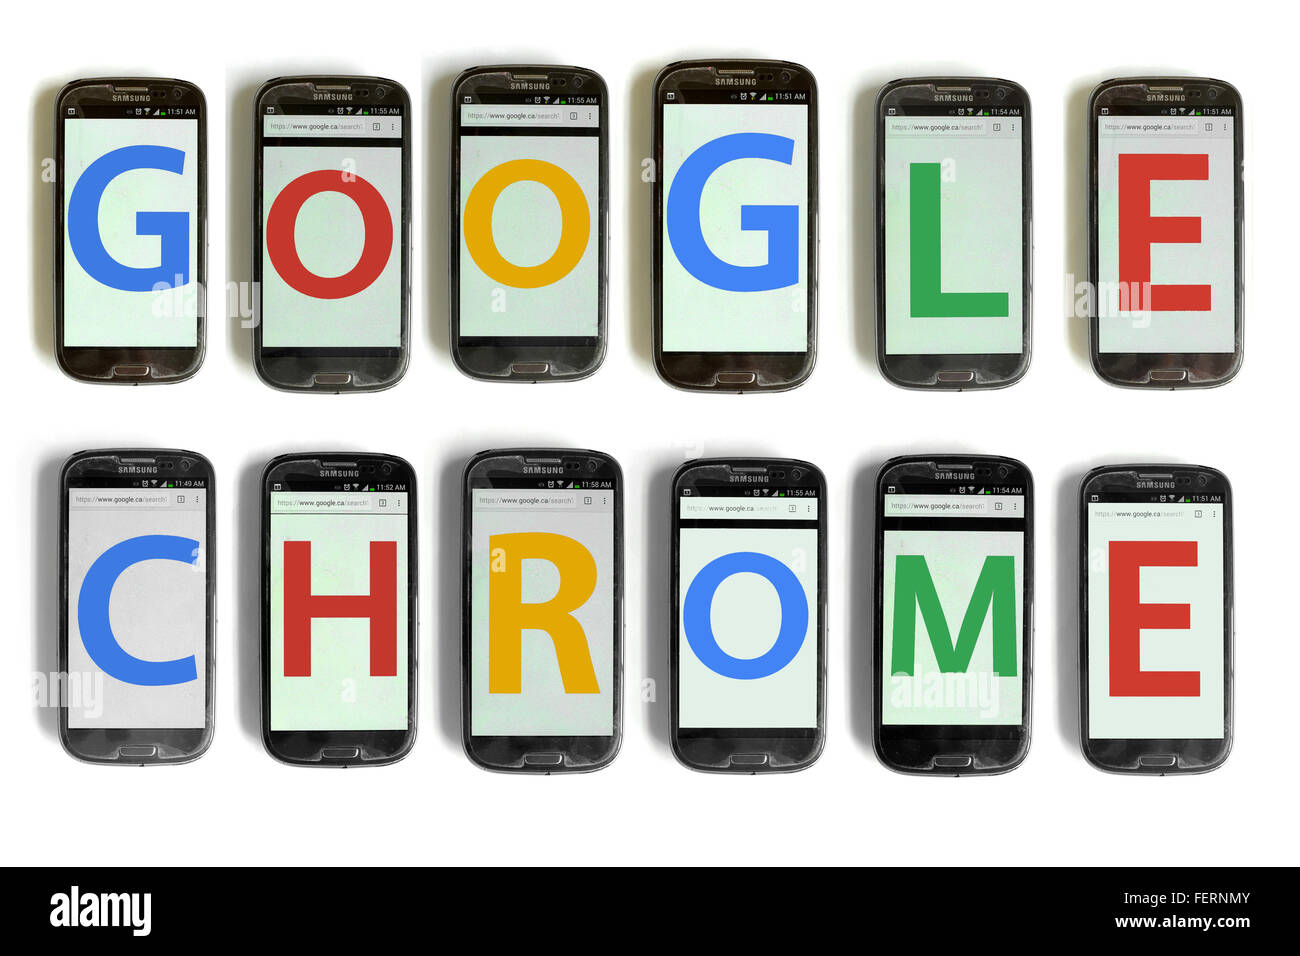 Google Chrome on the screens of smartphones photographed against a white background. Stock Photo